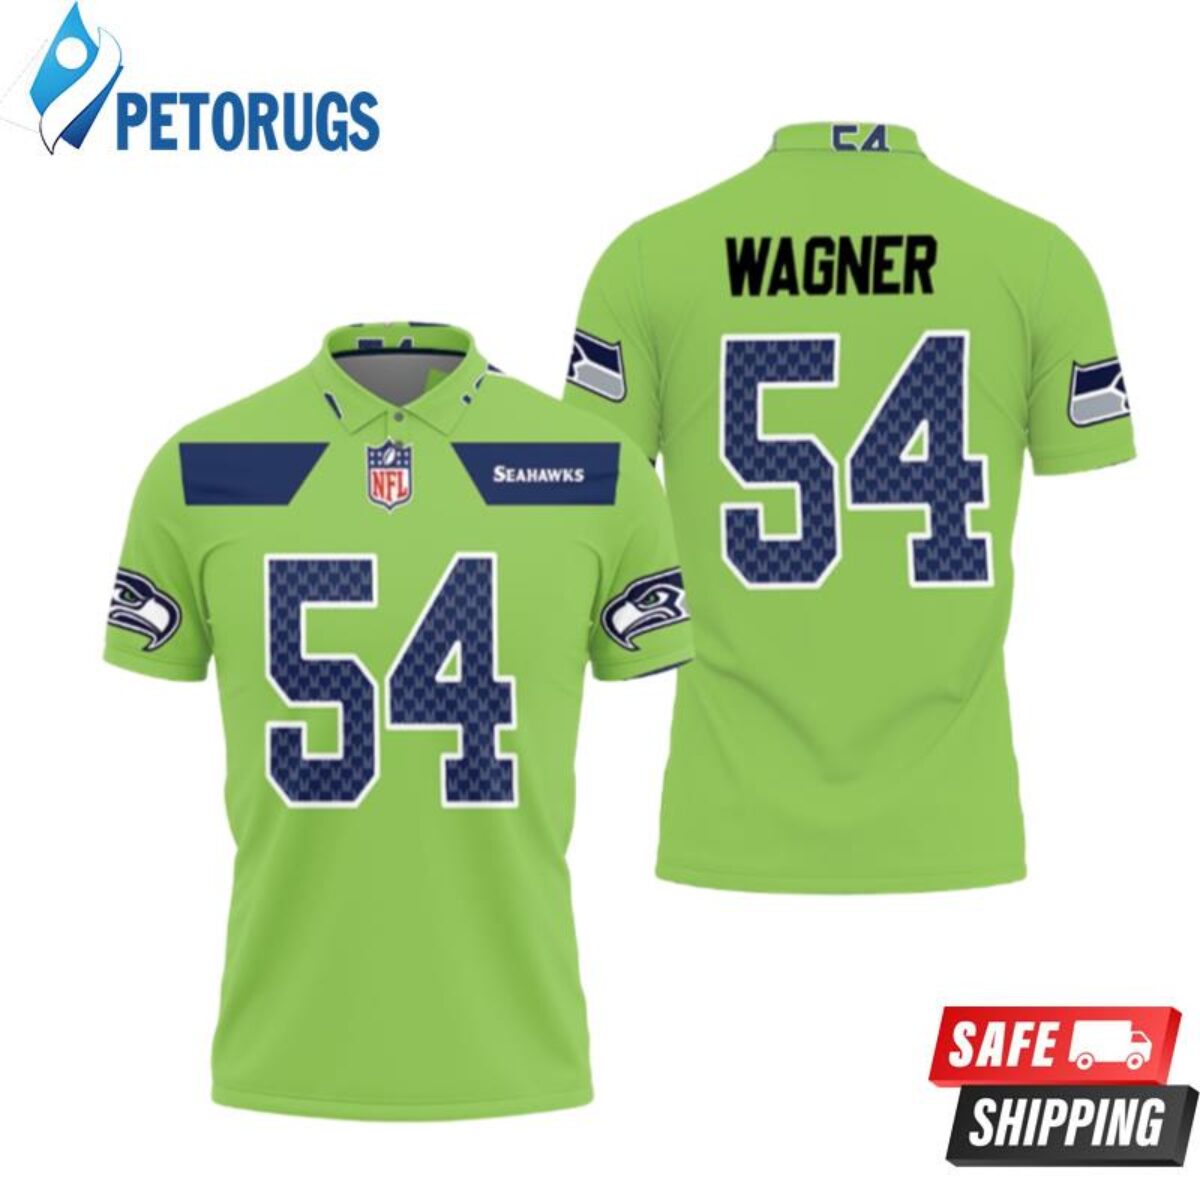 Official Seattle Seahawks Bobby Wagner Jerseys, Seahawks Bobby Wagner Jersey,  Jerseys